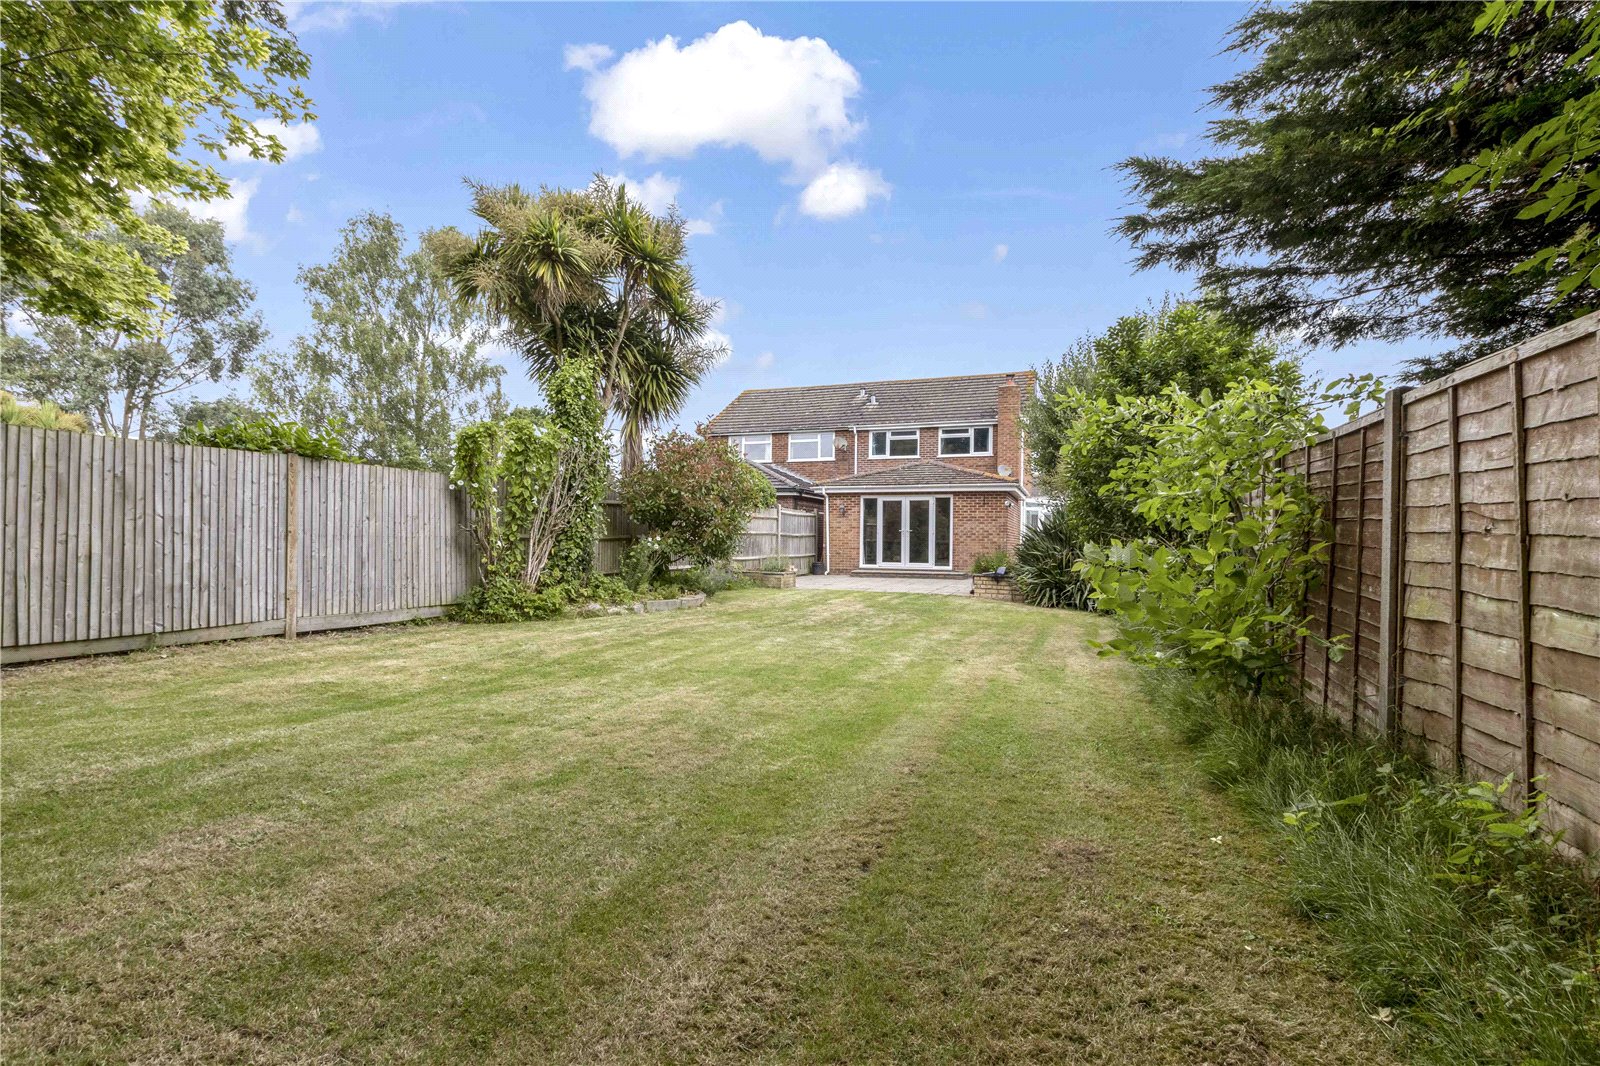 4 bed house for sale in St. Johns Close, Aldingbourne  - Property Image 2